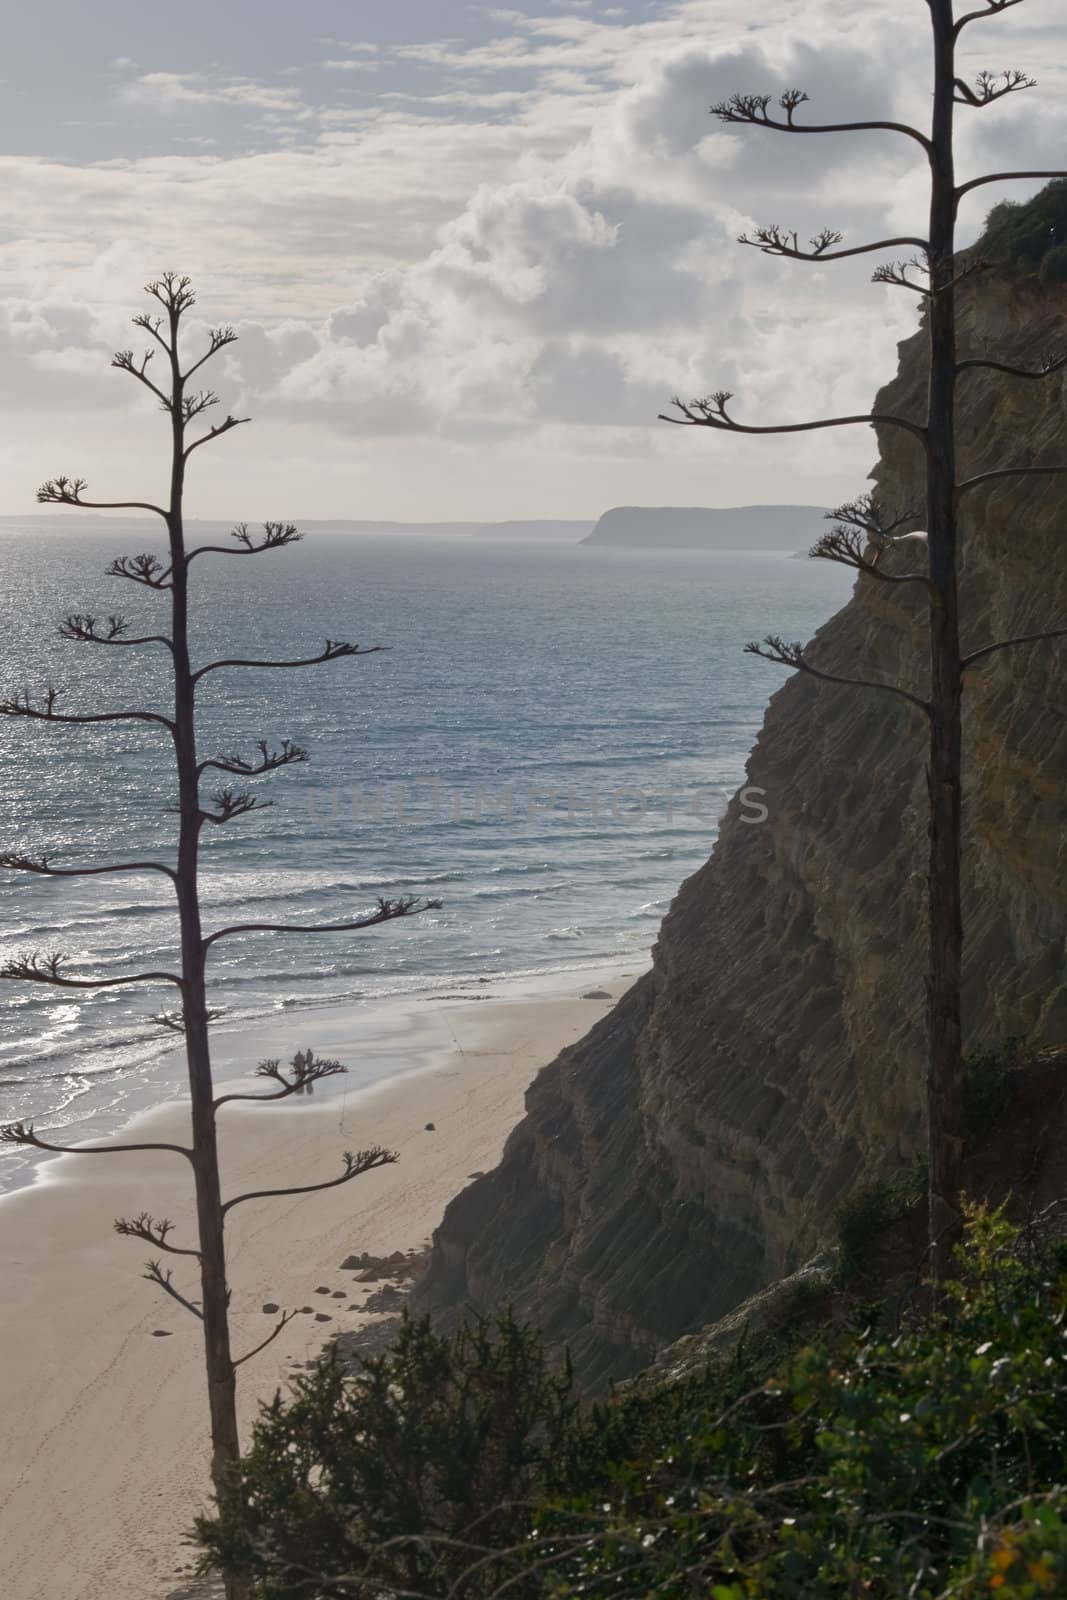 Two bare trees with cliffs, sky and the ocean in the background.